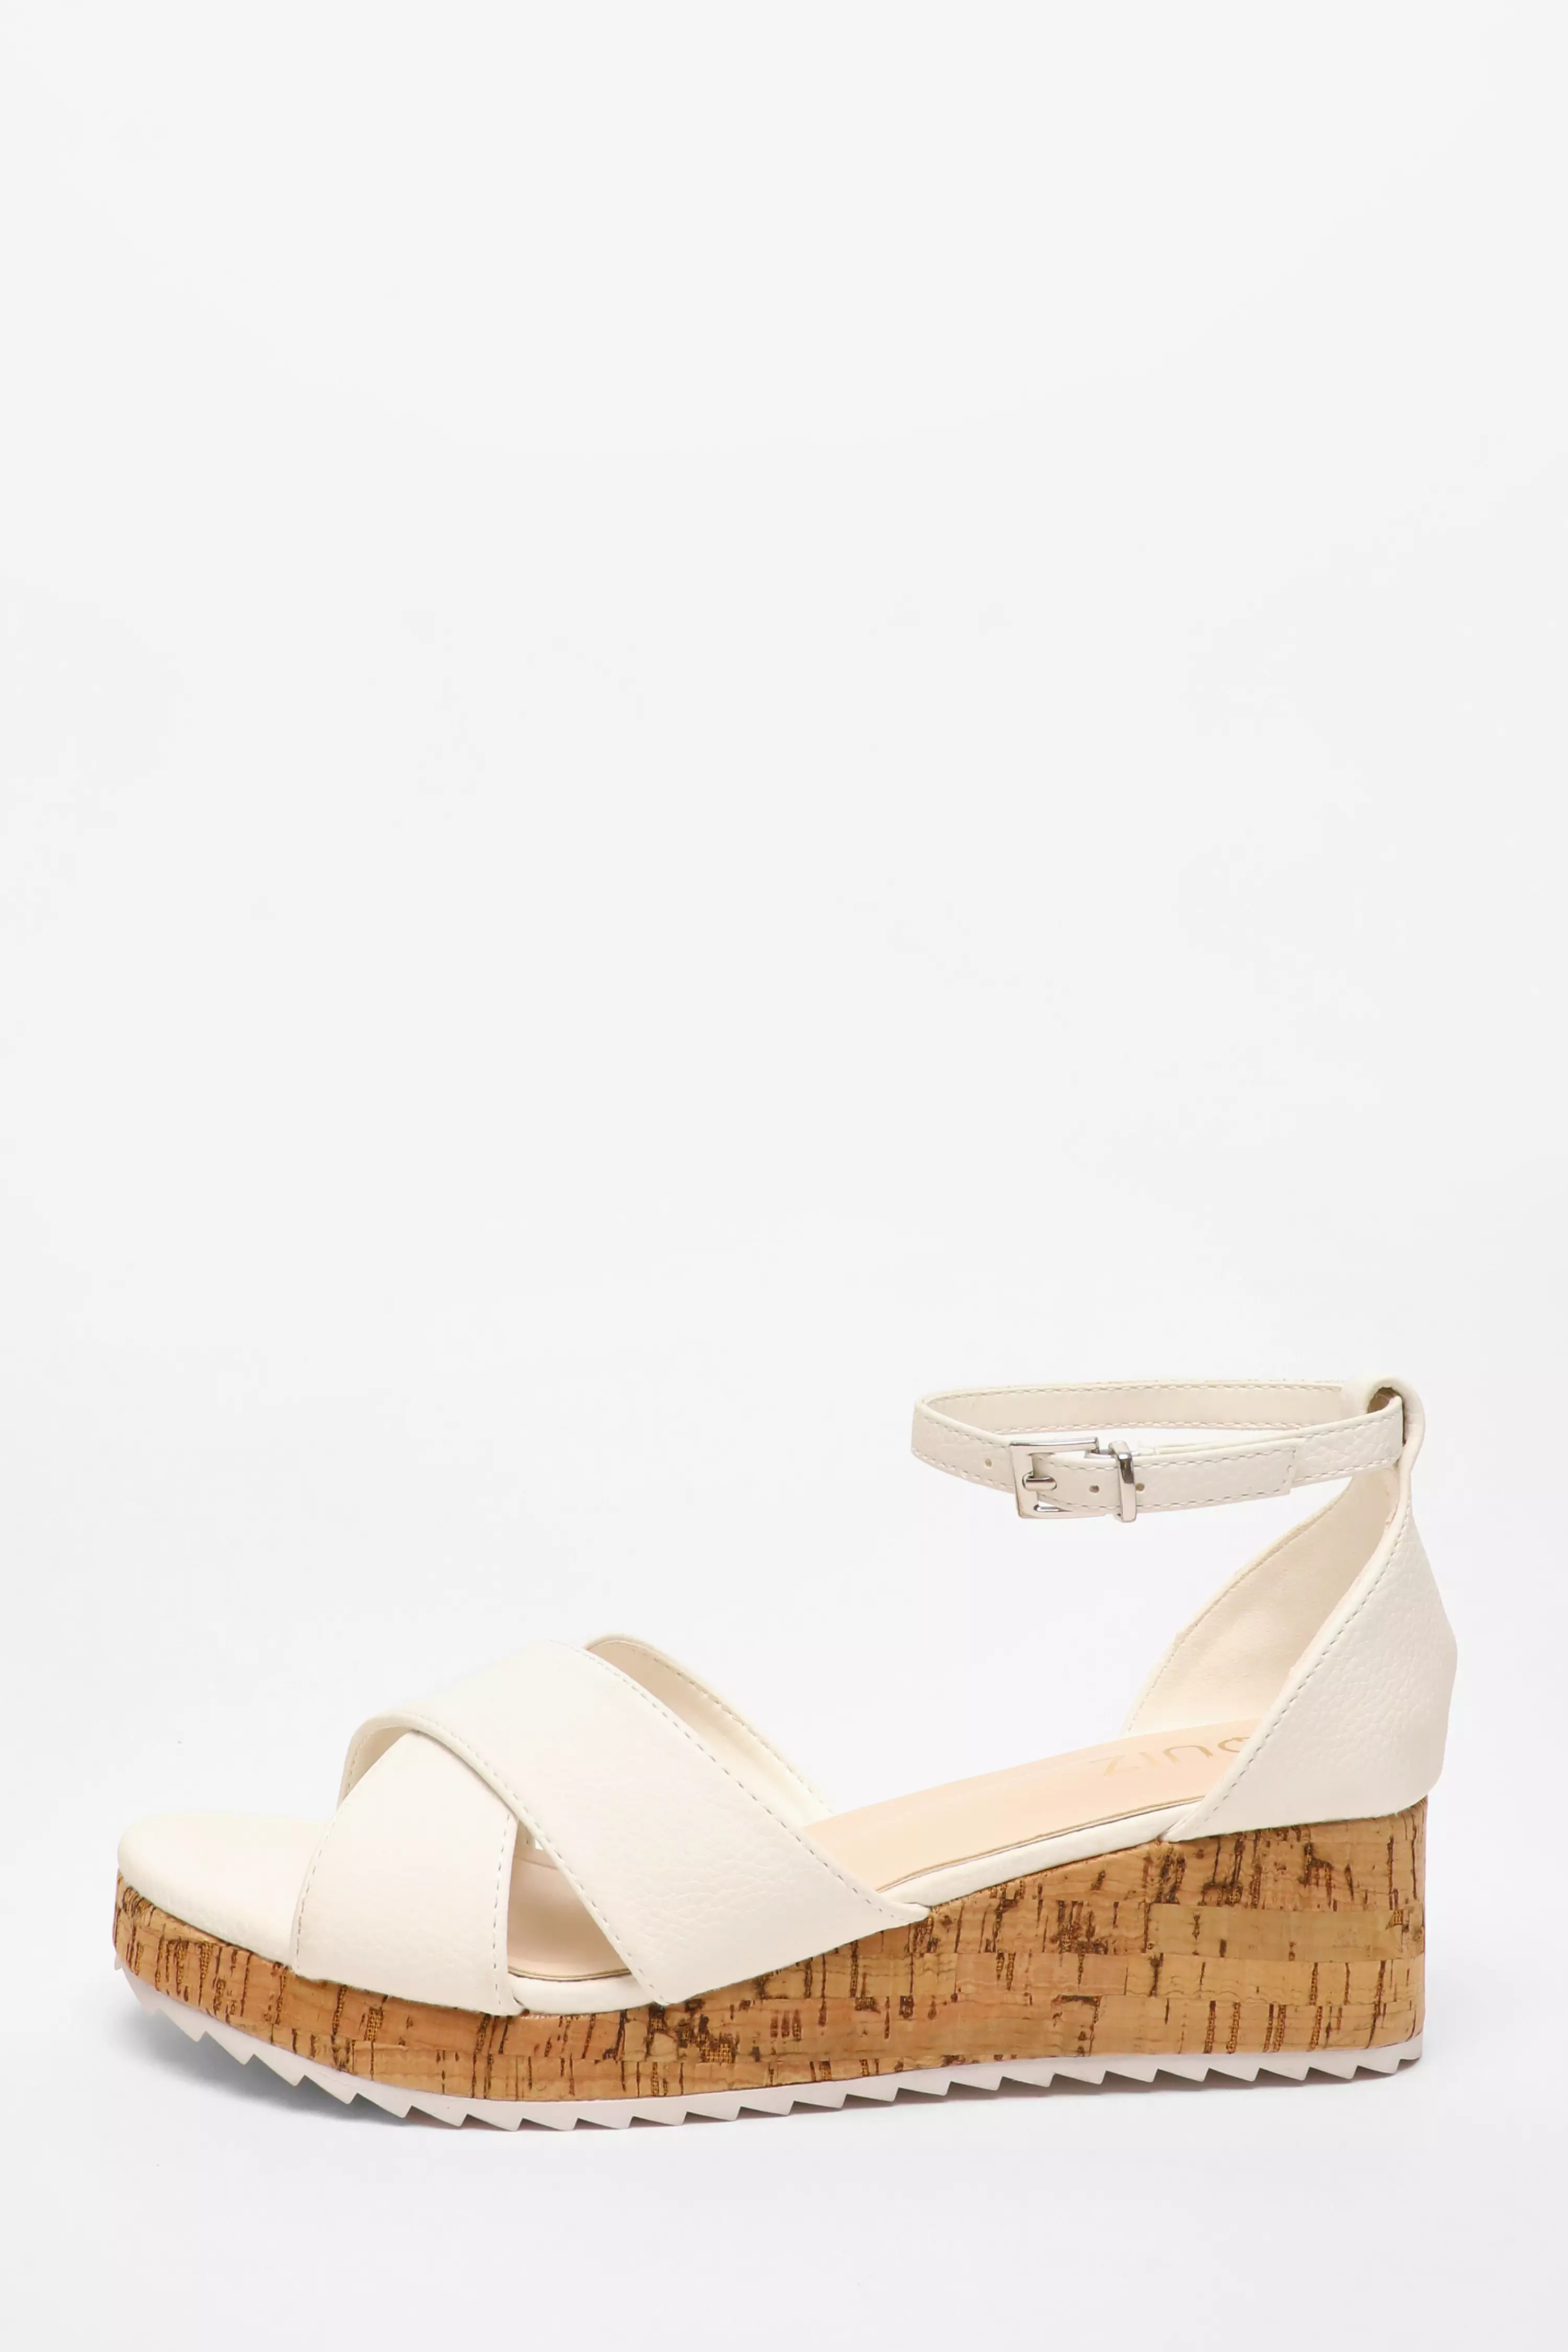 White Faux Leather Cross Strap Low Wedges